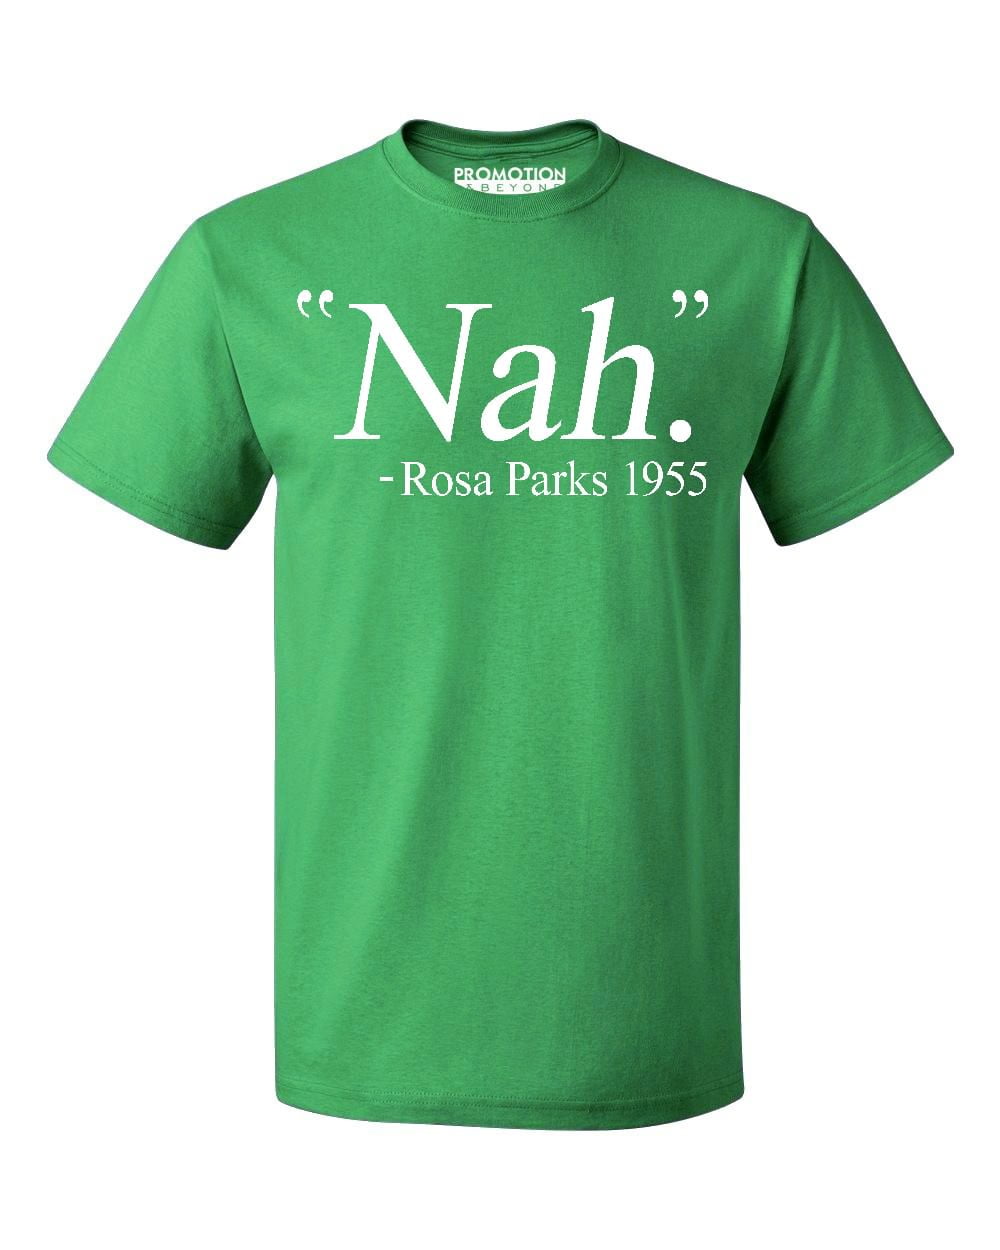 Nah. Rosa Parks 1955 Civil Rights Quote Men\'s T-shirt, S, Green